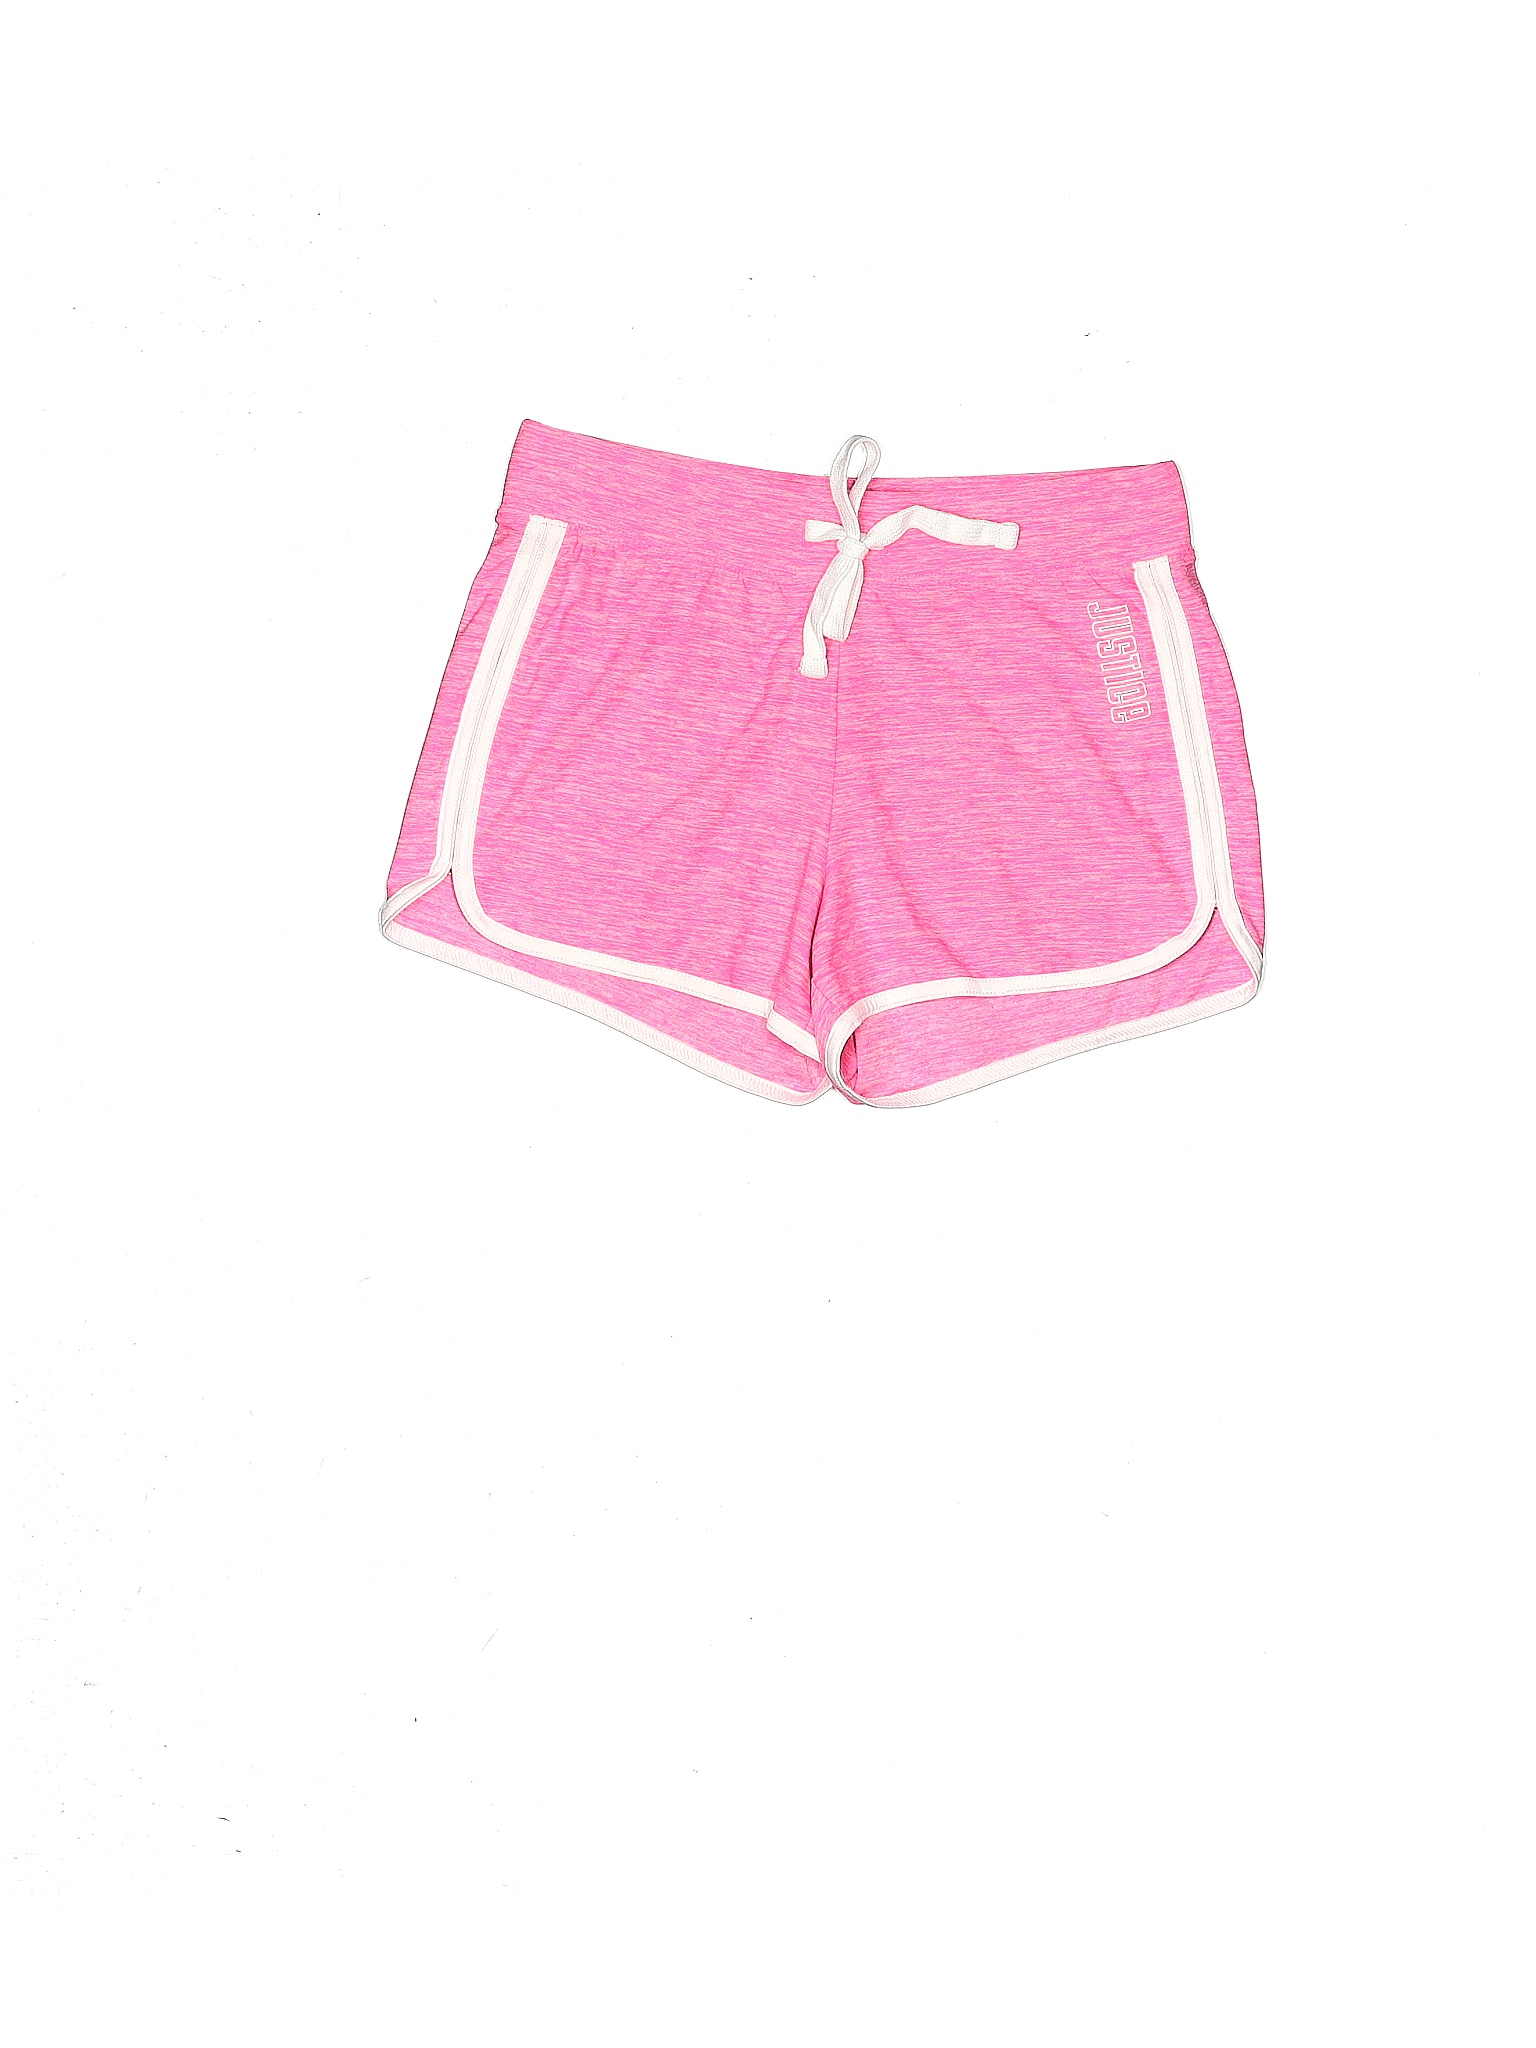 Justice Girls' Shorts On Sale Up To 90% Off Retail | thredUP